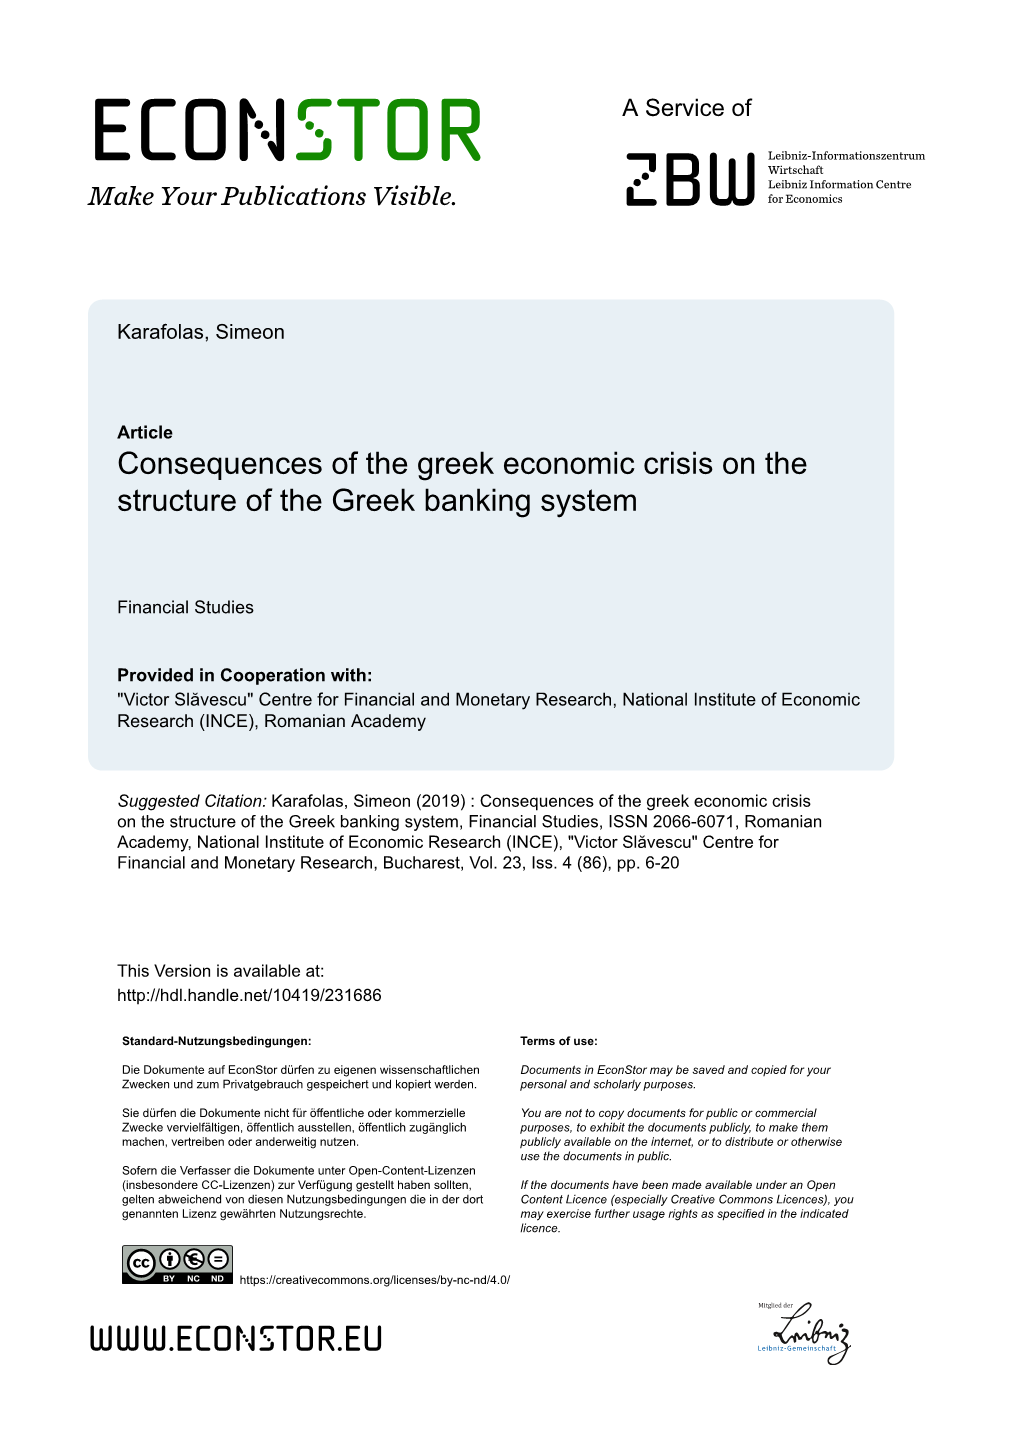 Consequences of the Greek Economic Crisis on the Structure of the Greek Banking System